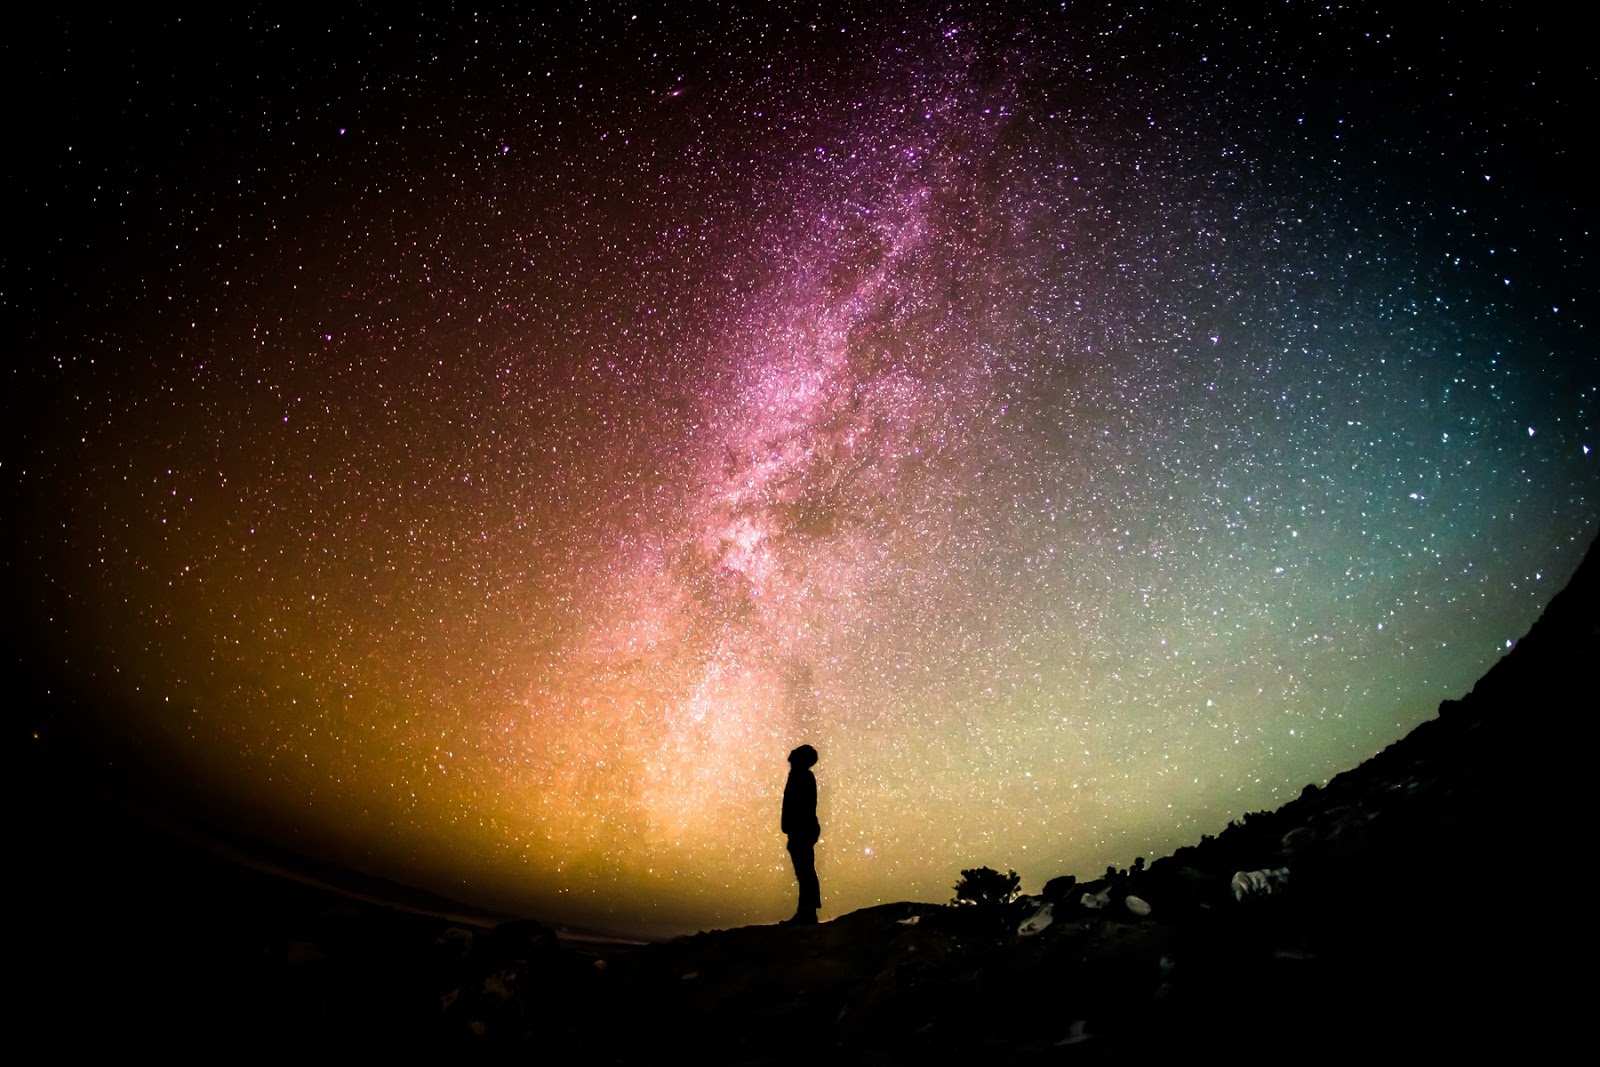 Man Looking Into Space - HD Wallpaper 